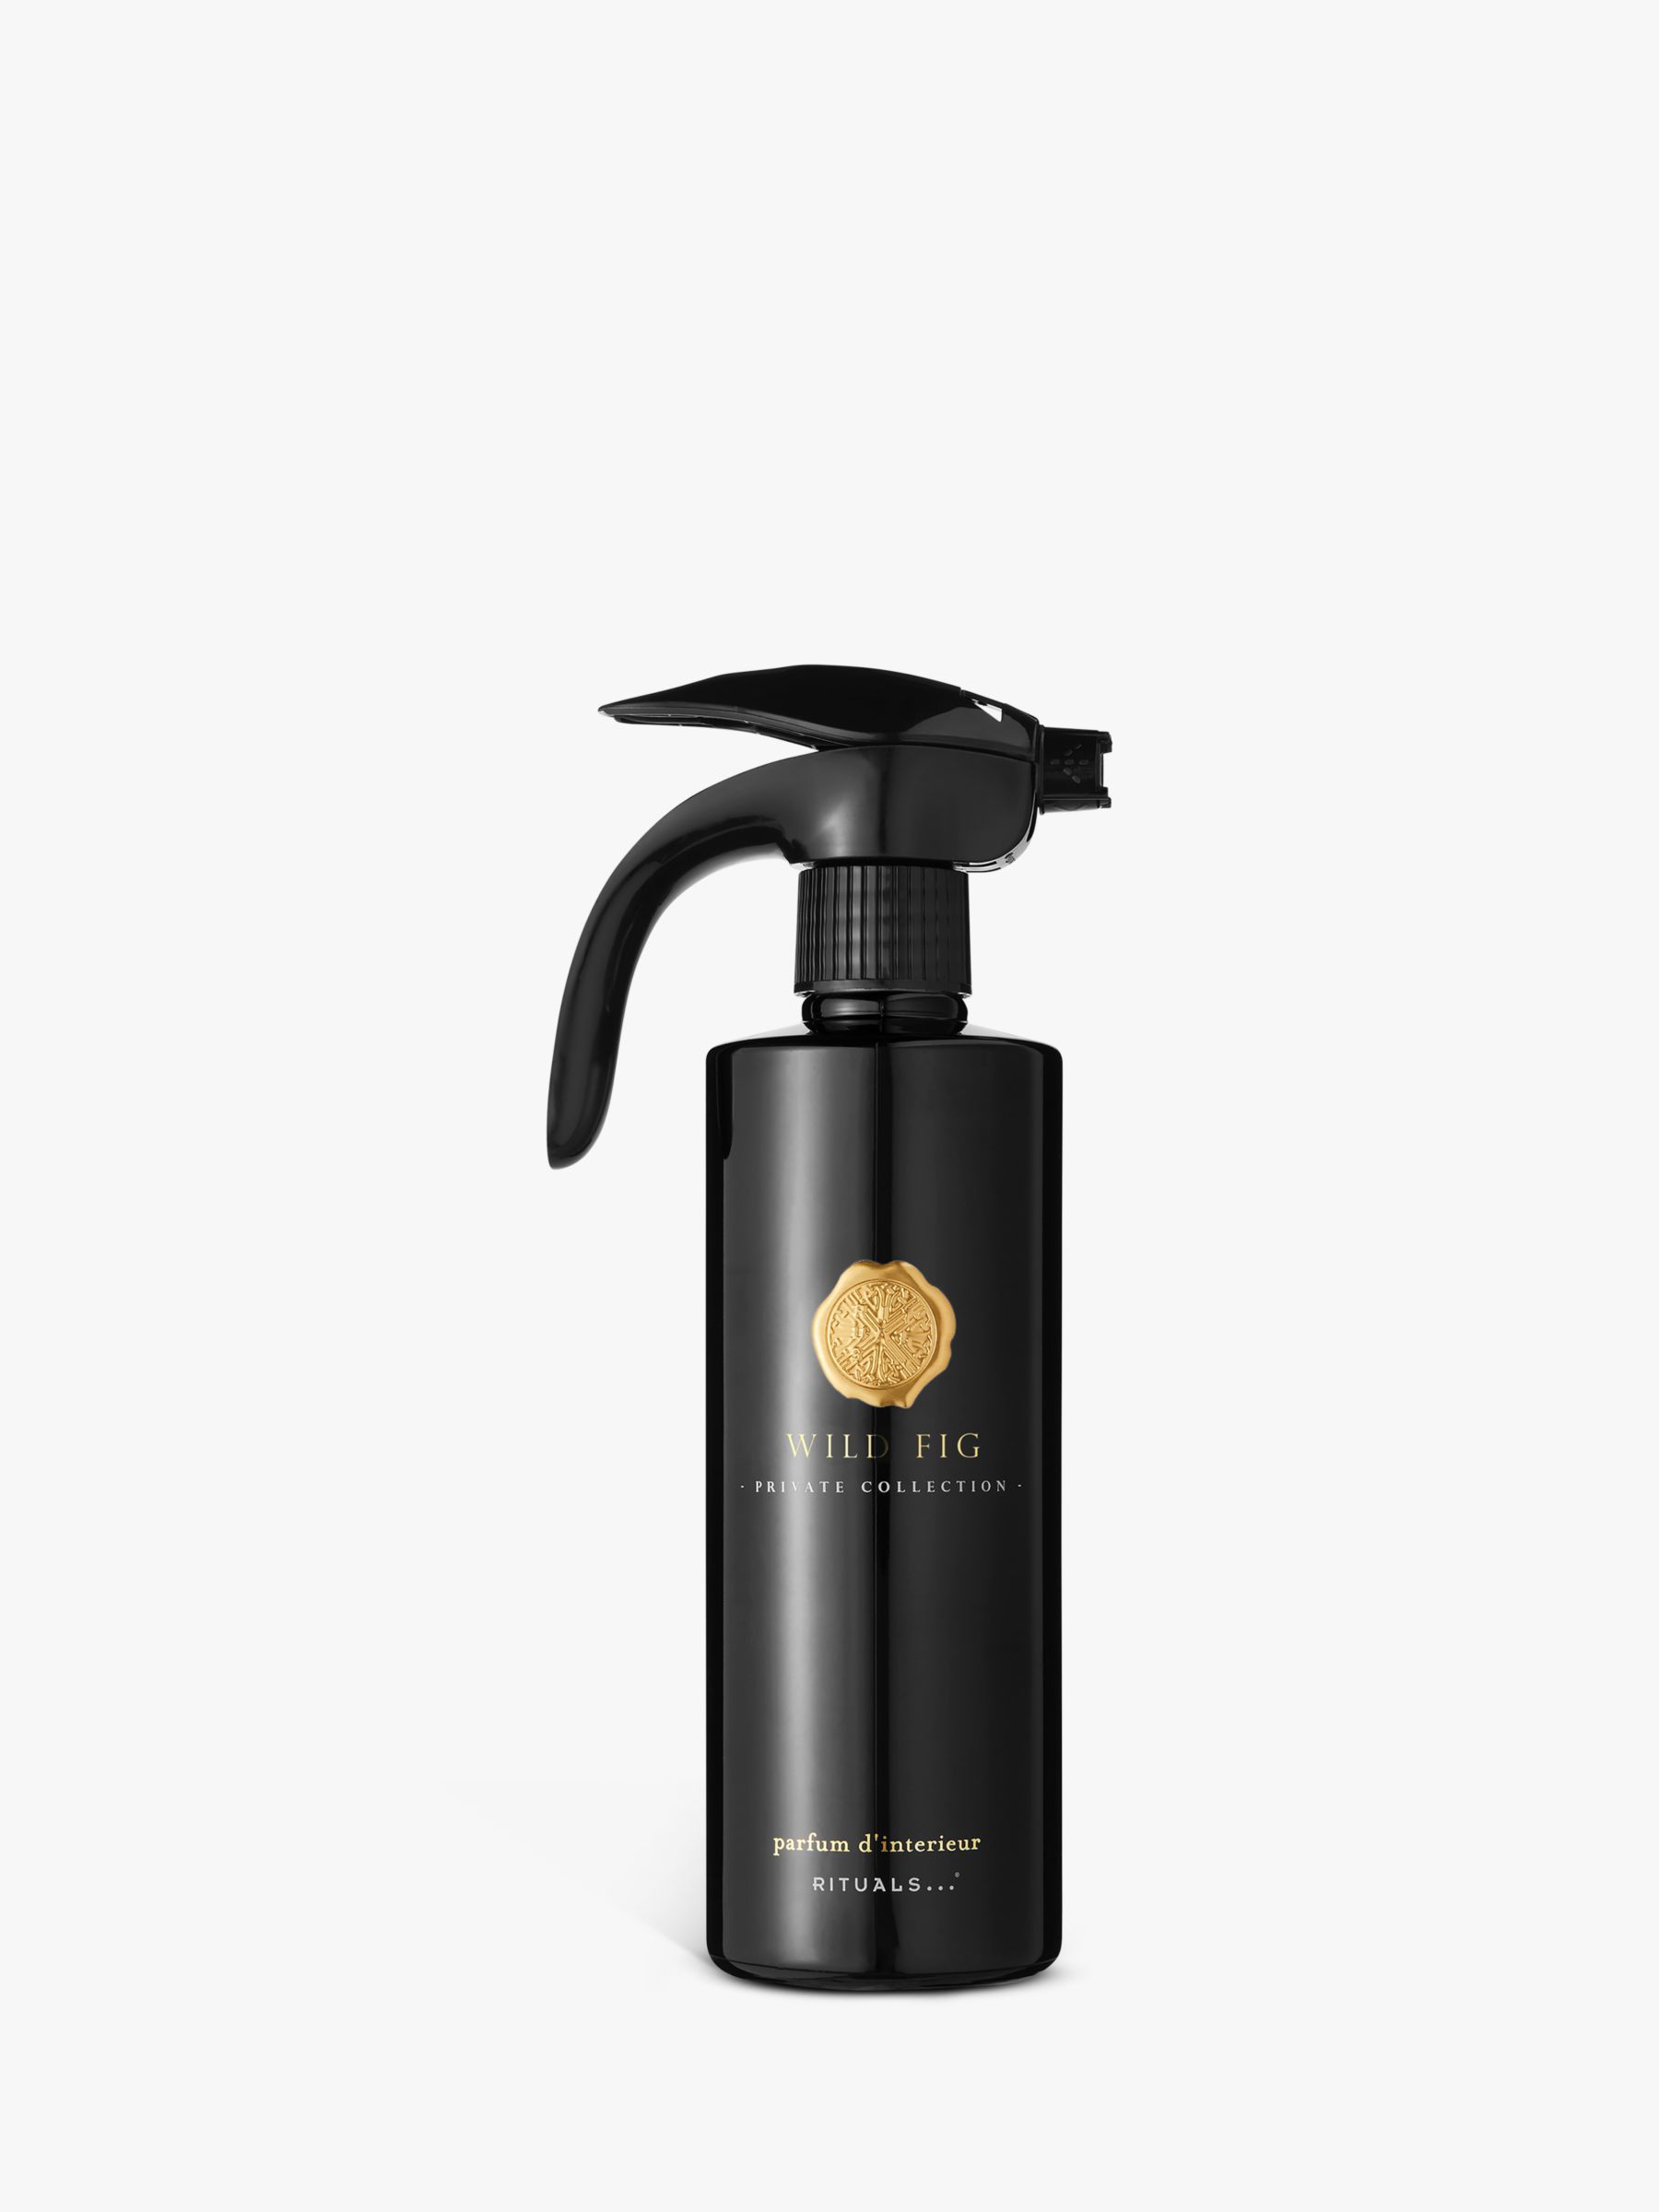 Rituals Private Collection Wild Fig Parfum d'Interieur Room Spray, 500ml | John Lewis (UK)